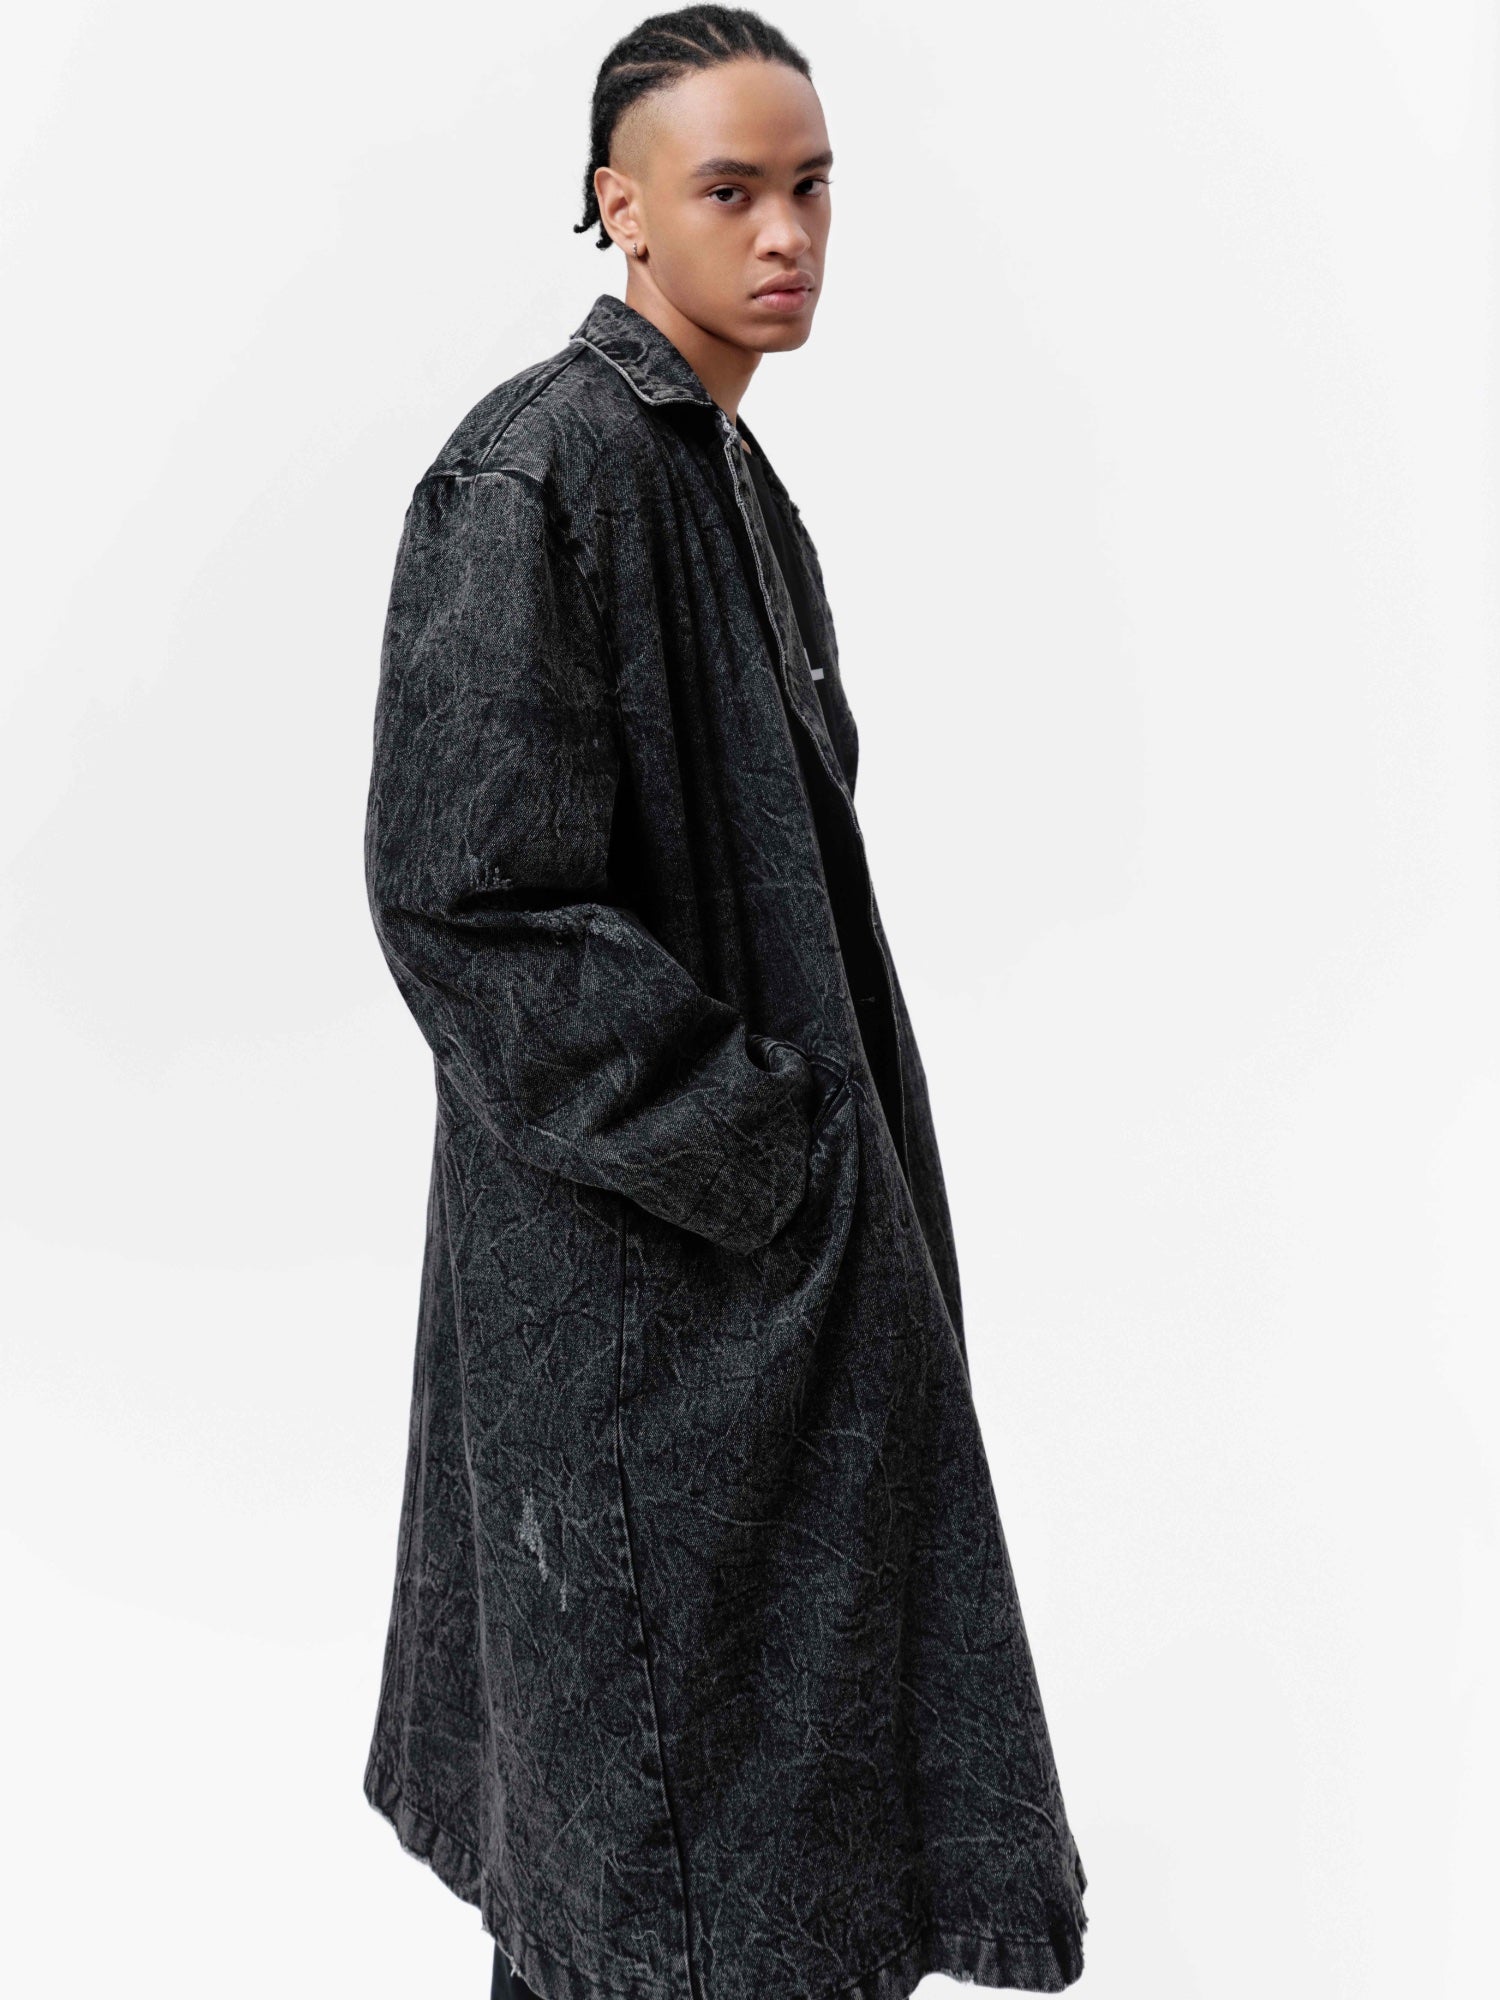 VANN VALRENCÉ Washing Grey Jeans Trench Coat | MADA IN CHINA